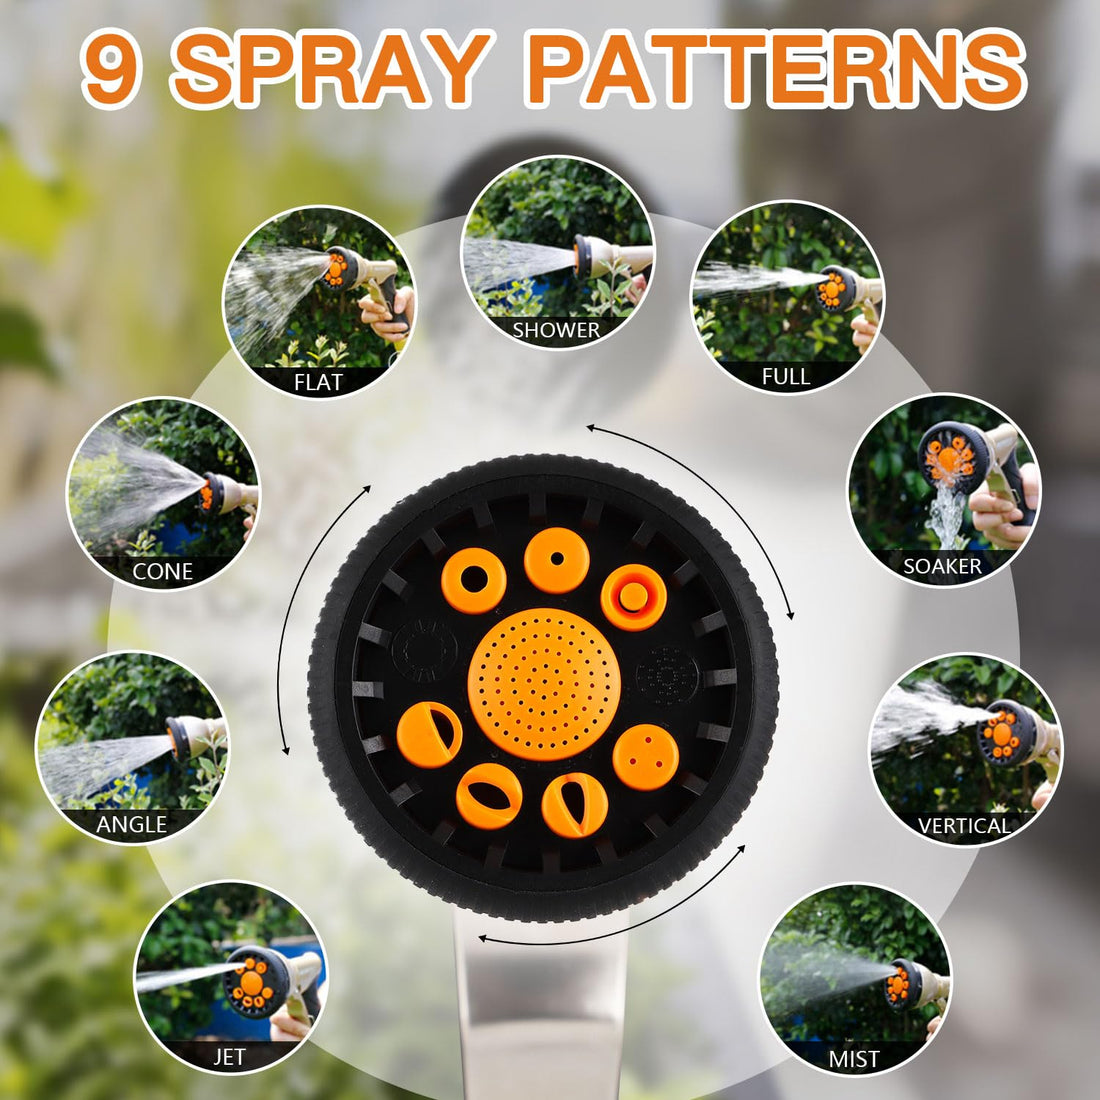 Tesony Garden Hose Nozzle, Heavy Duty Metal Water Hose Sprayer with 9 Adjustable Spray Patterns and Brass Hose Quick Connector, High Pressure Handheld Spray Nozzle Gun for Watering Plants, Car Washing